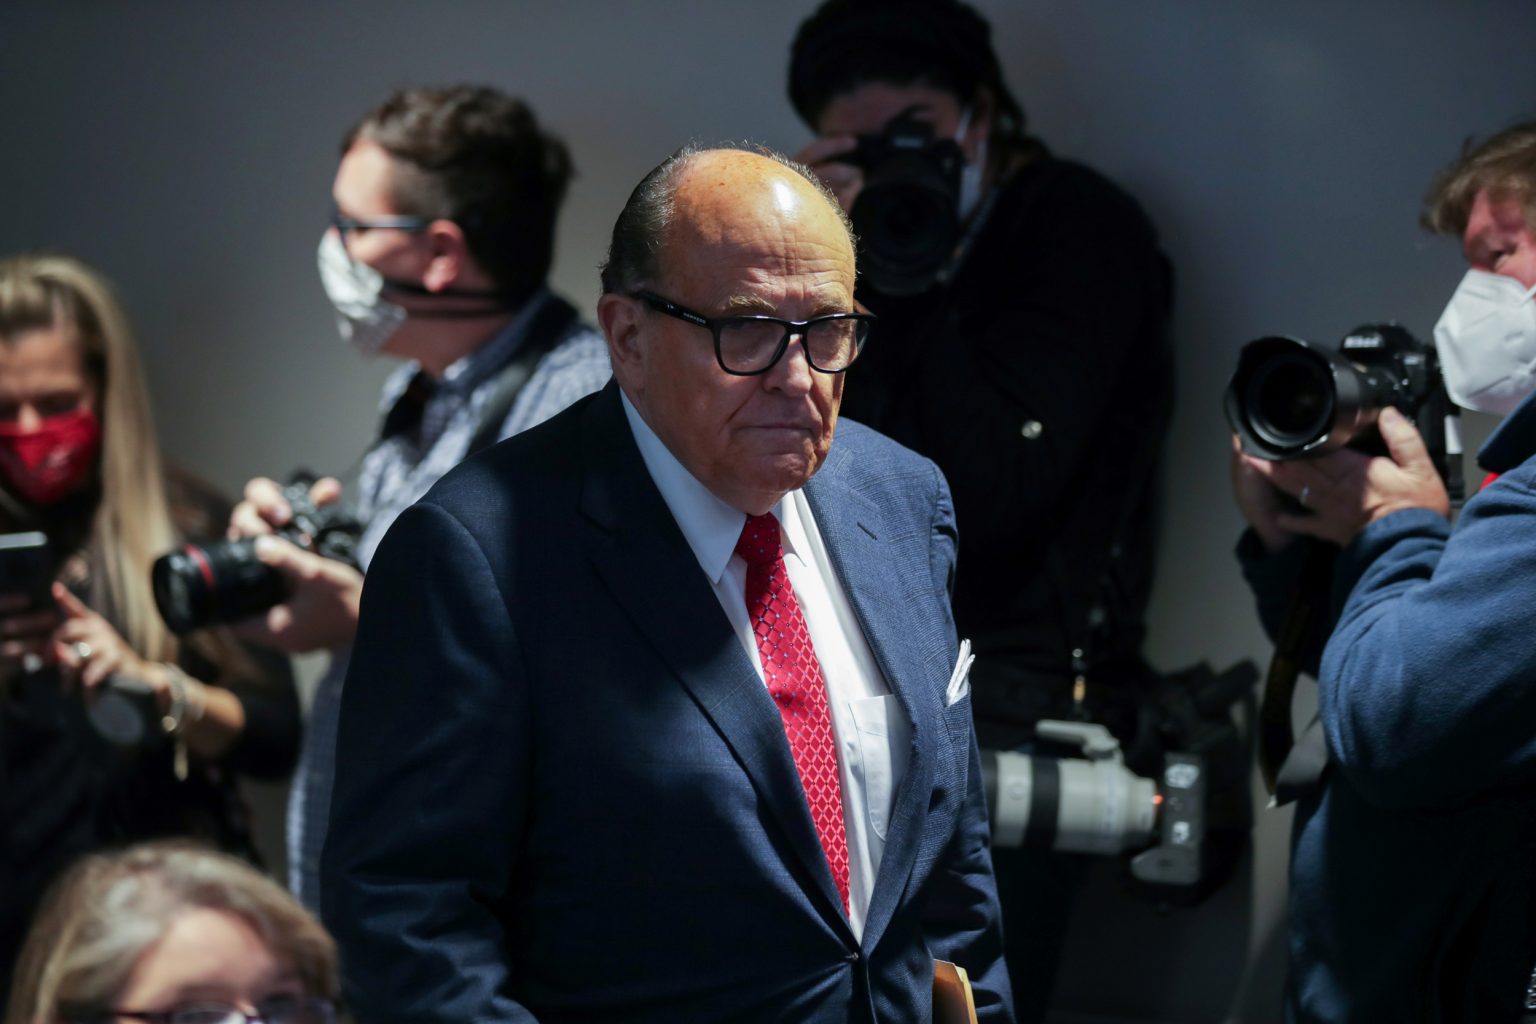 Rudy Giuliani Suspended From Practicing Law In D.C